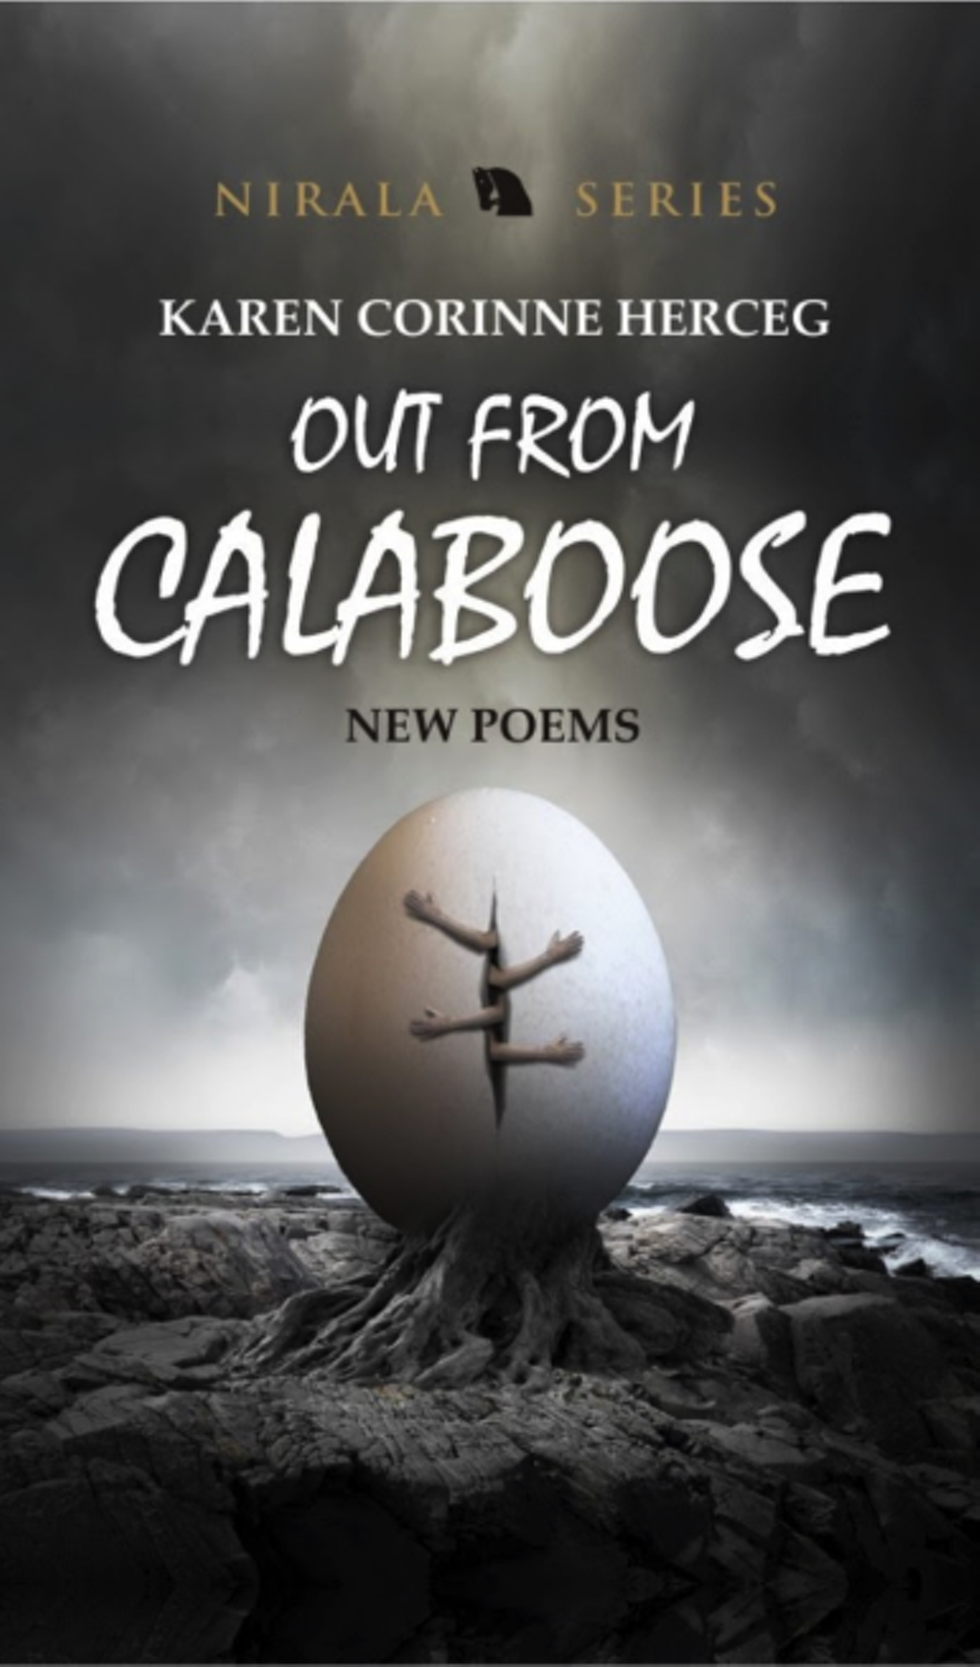 a6e3338a_out_from_calaboose_cover_-_website.png